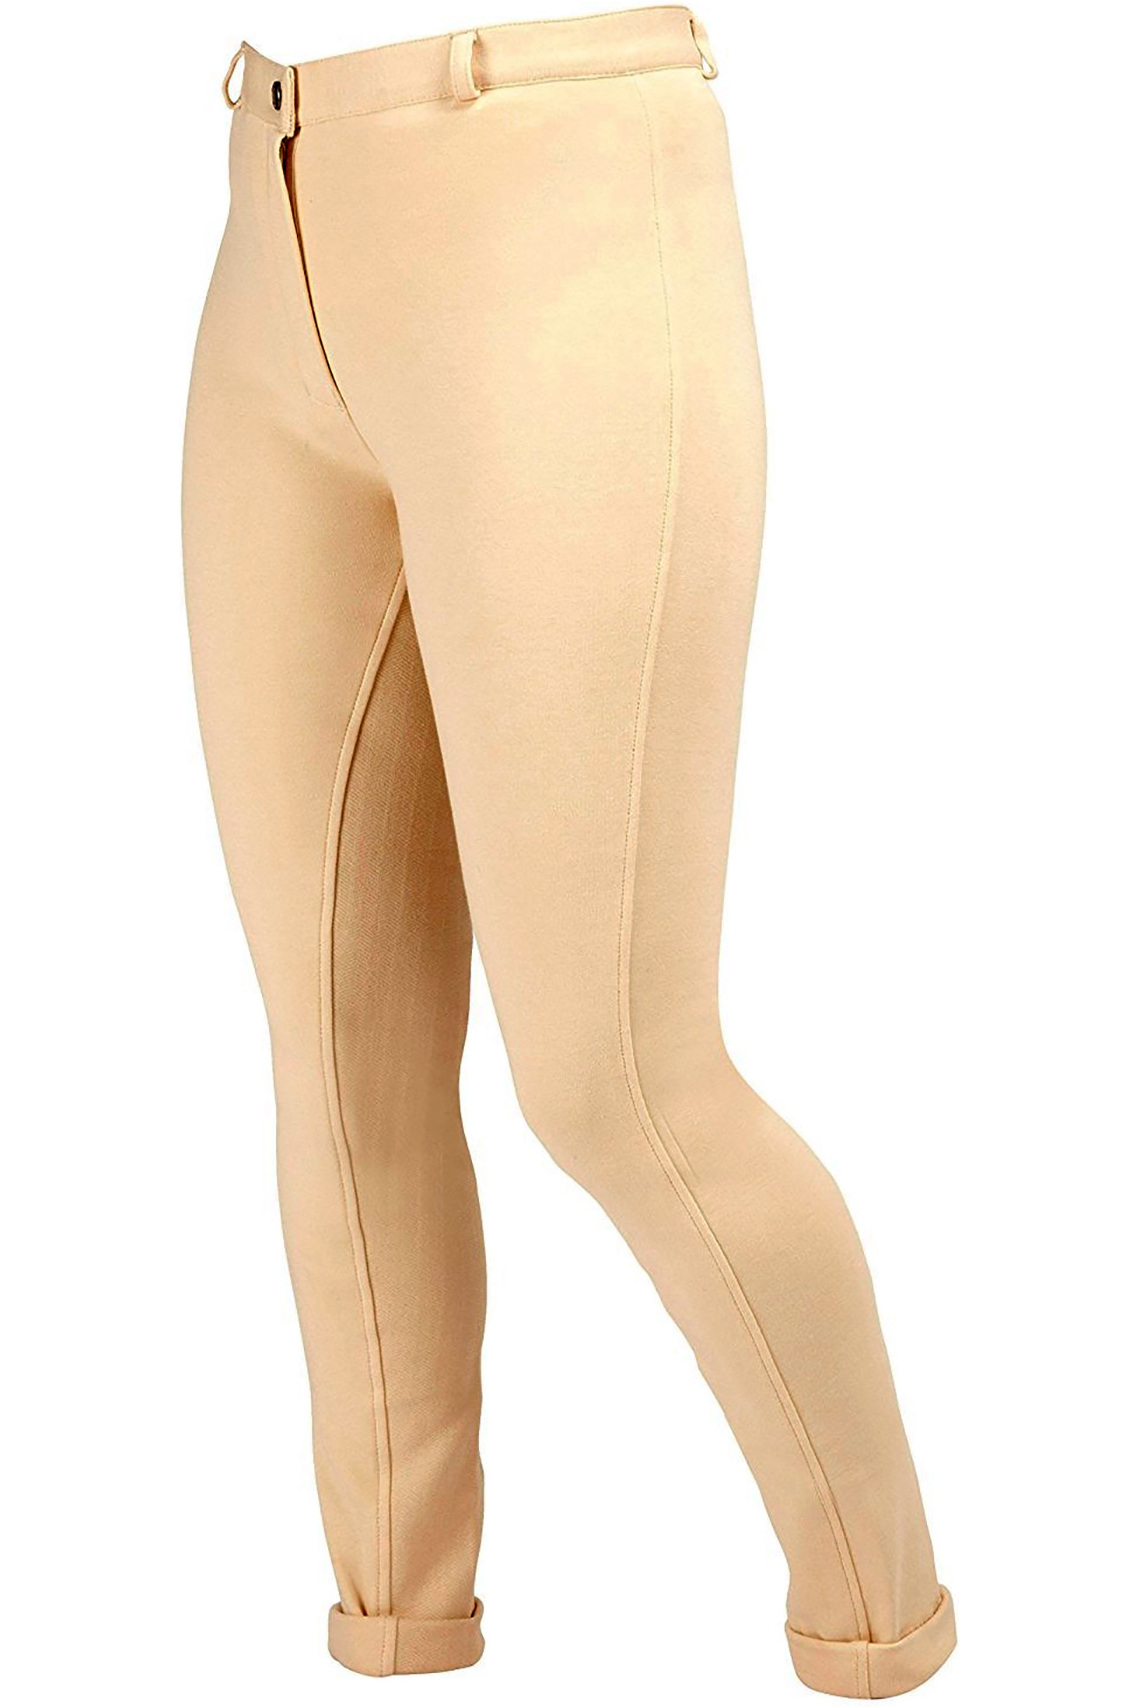 30 Inch Harry Hall Womenss Womens Chester Sticky Bum Long Traditional Styled Jodhpurs-Beige